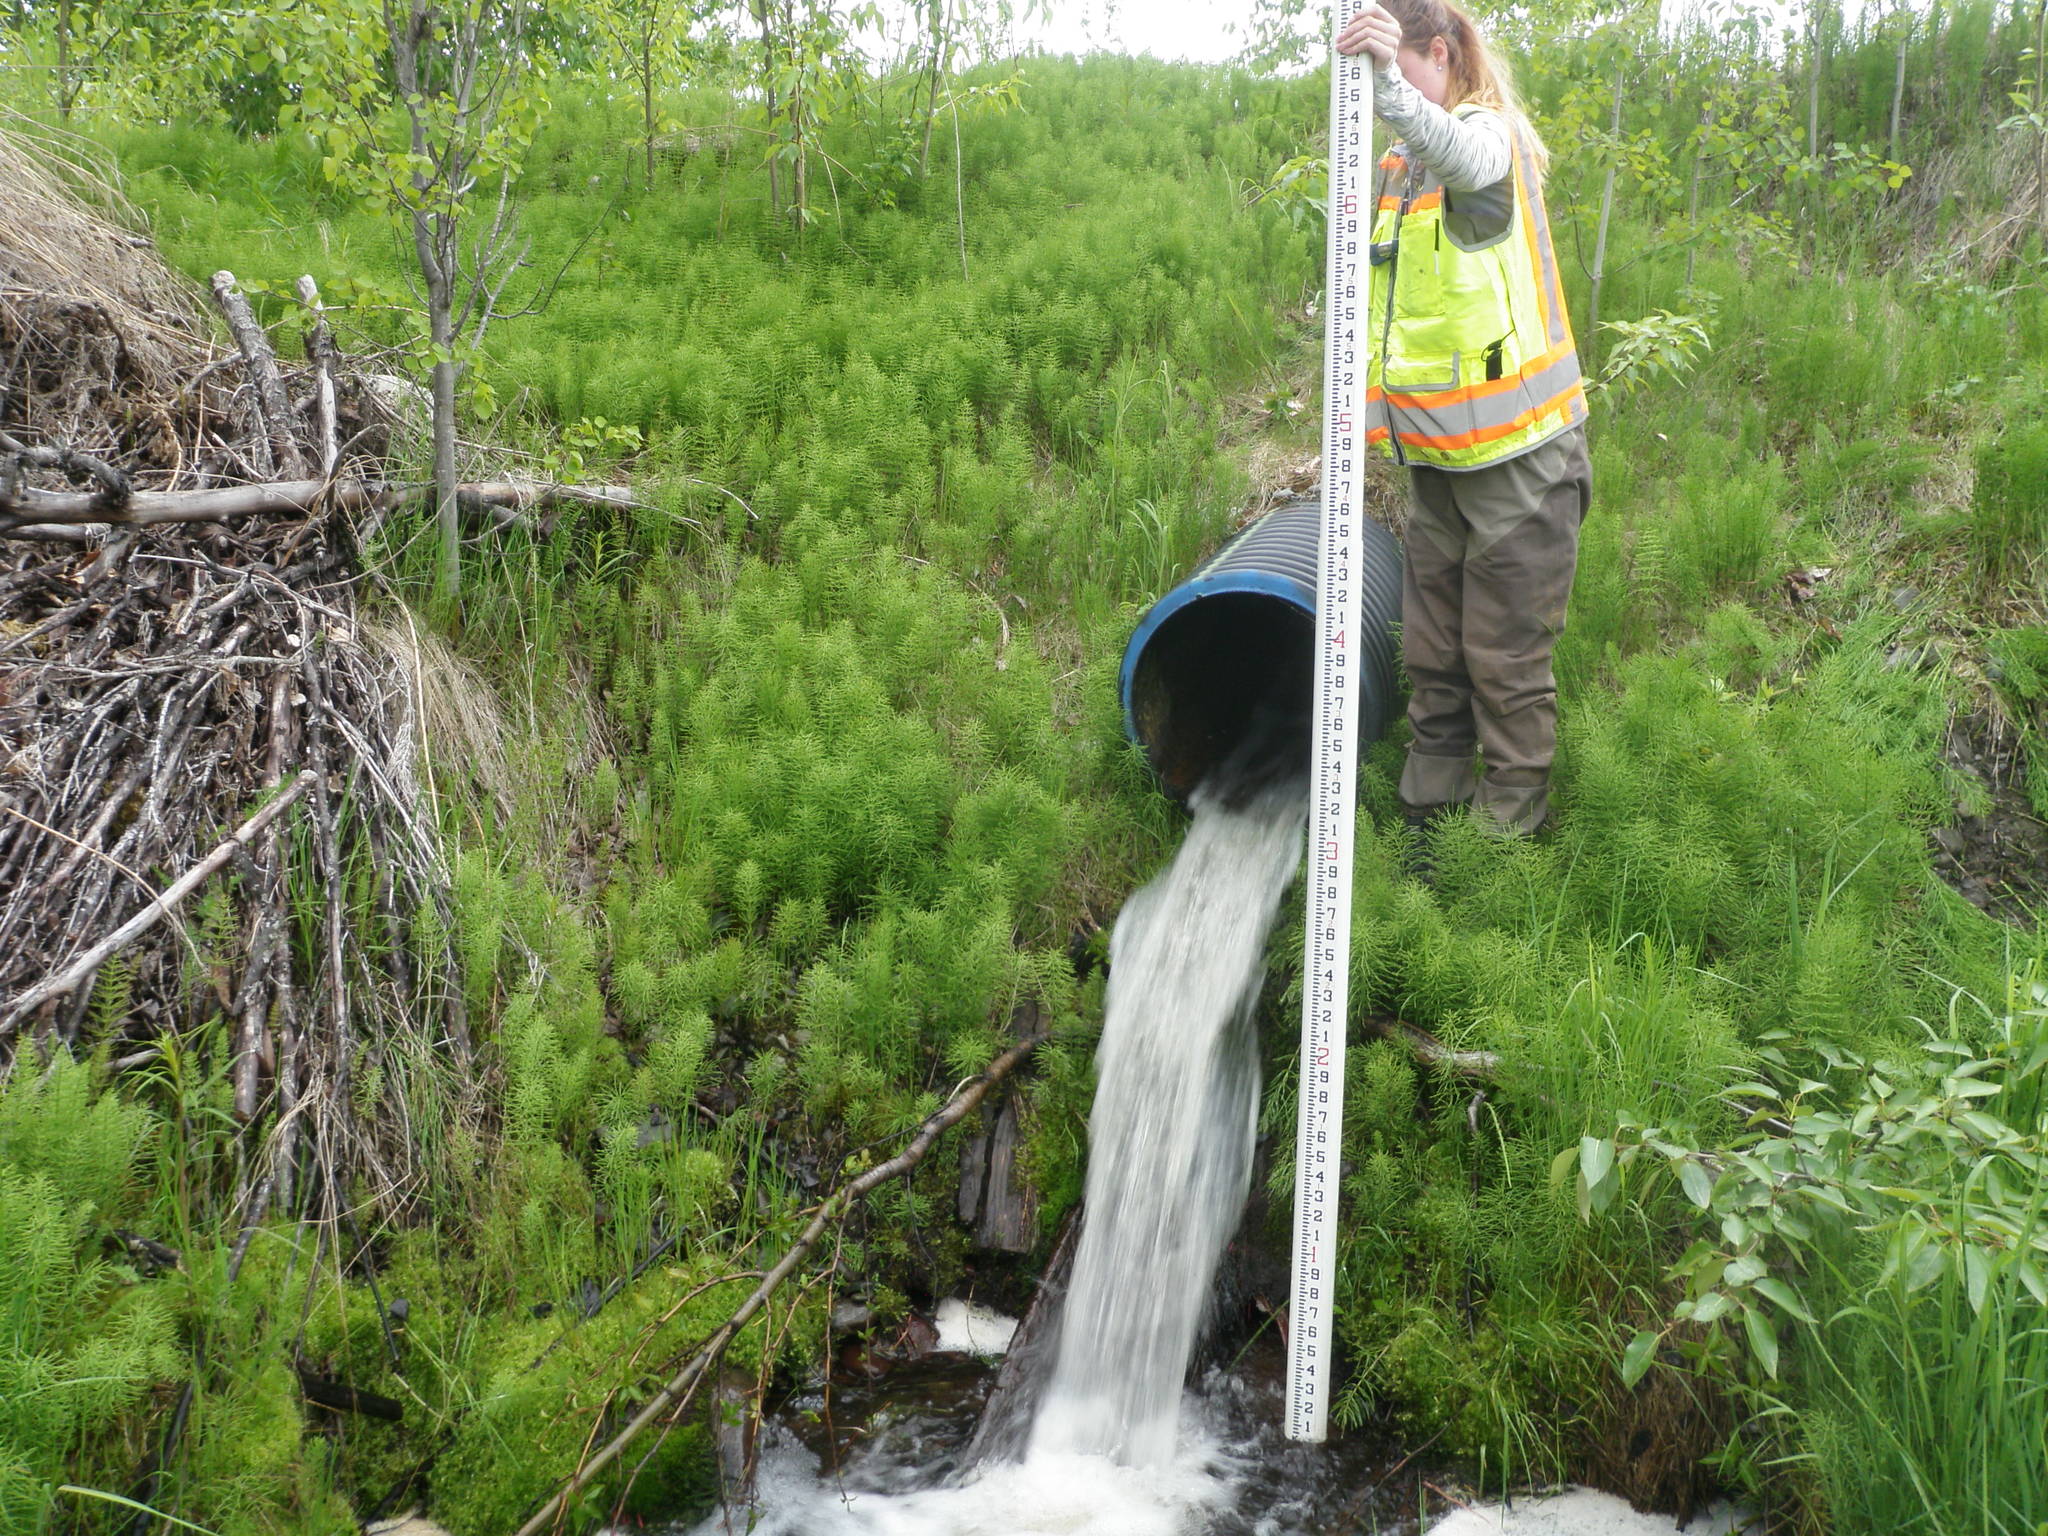 This perched stream culvert clearly prevents salmon and other anadromous fish from migrating further upstream and would be color coded as red in the ADF&G Fish Resource Monitor. (Photo courtesy Kenai National Wildlife Refuge)